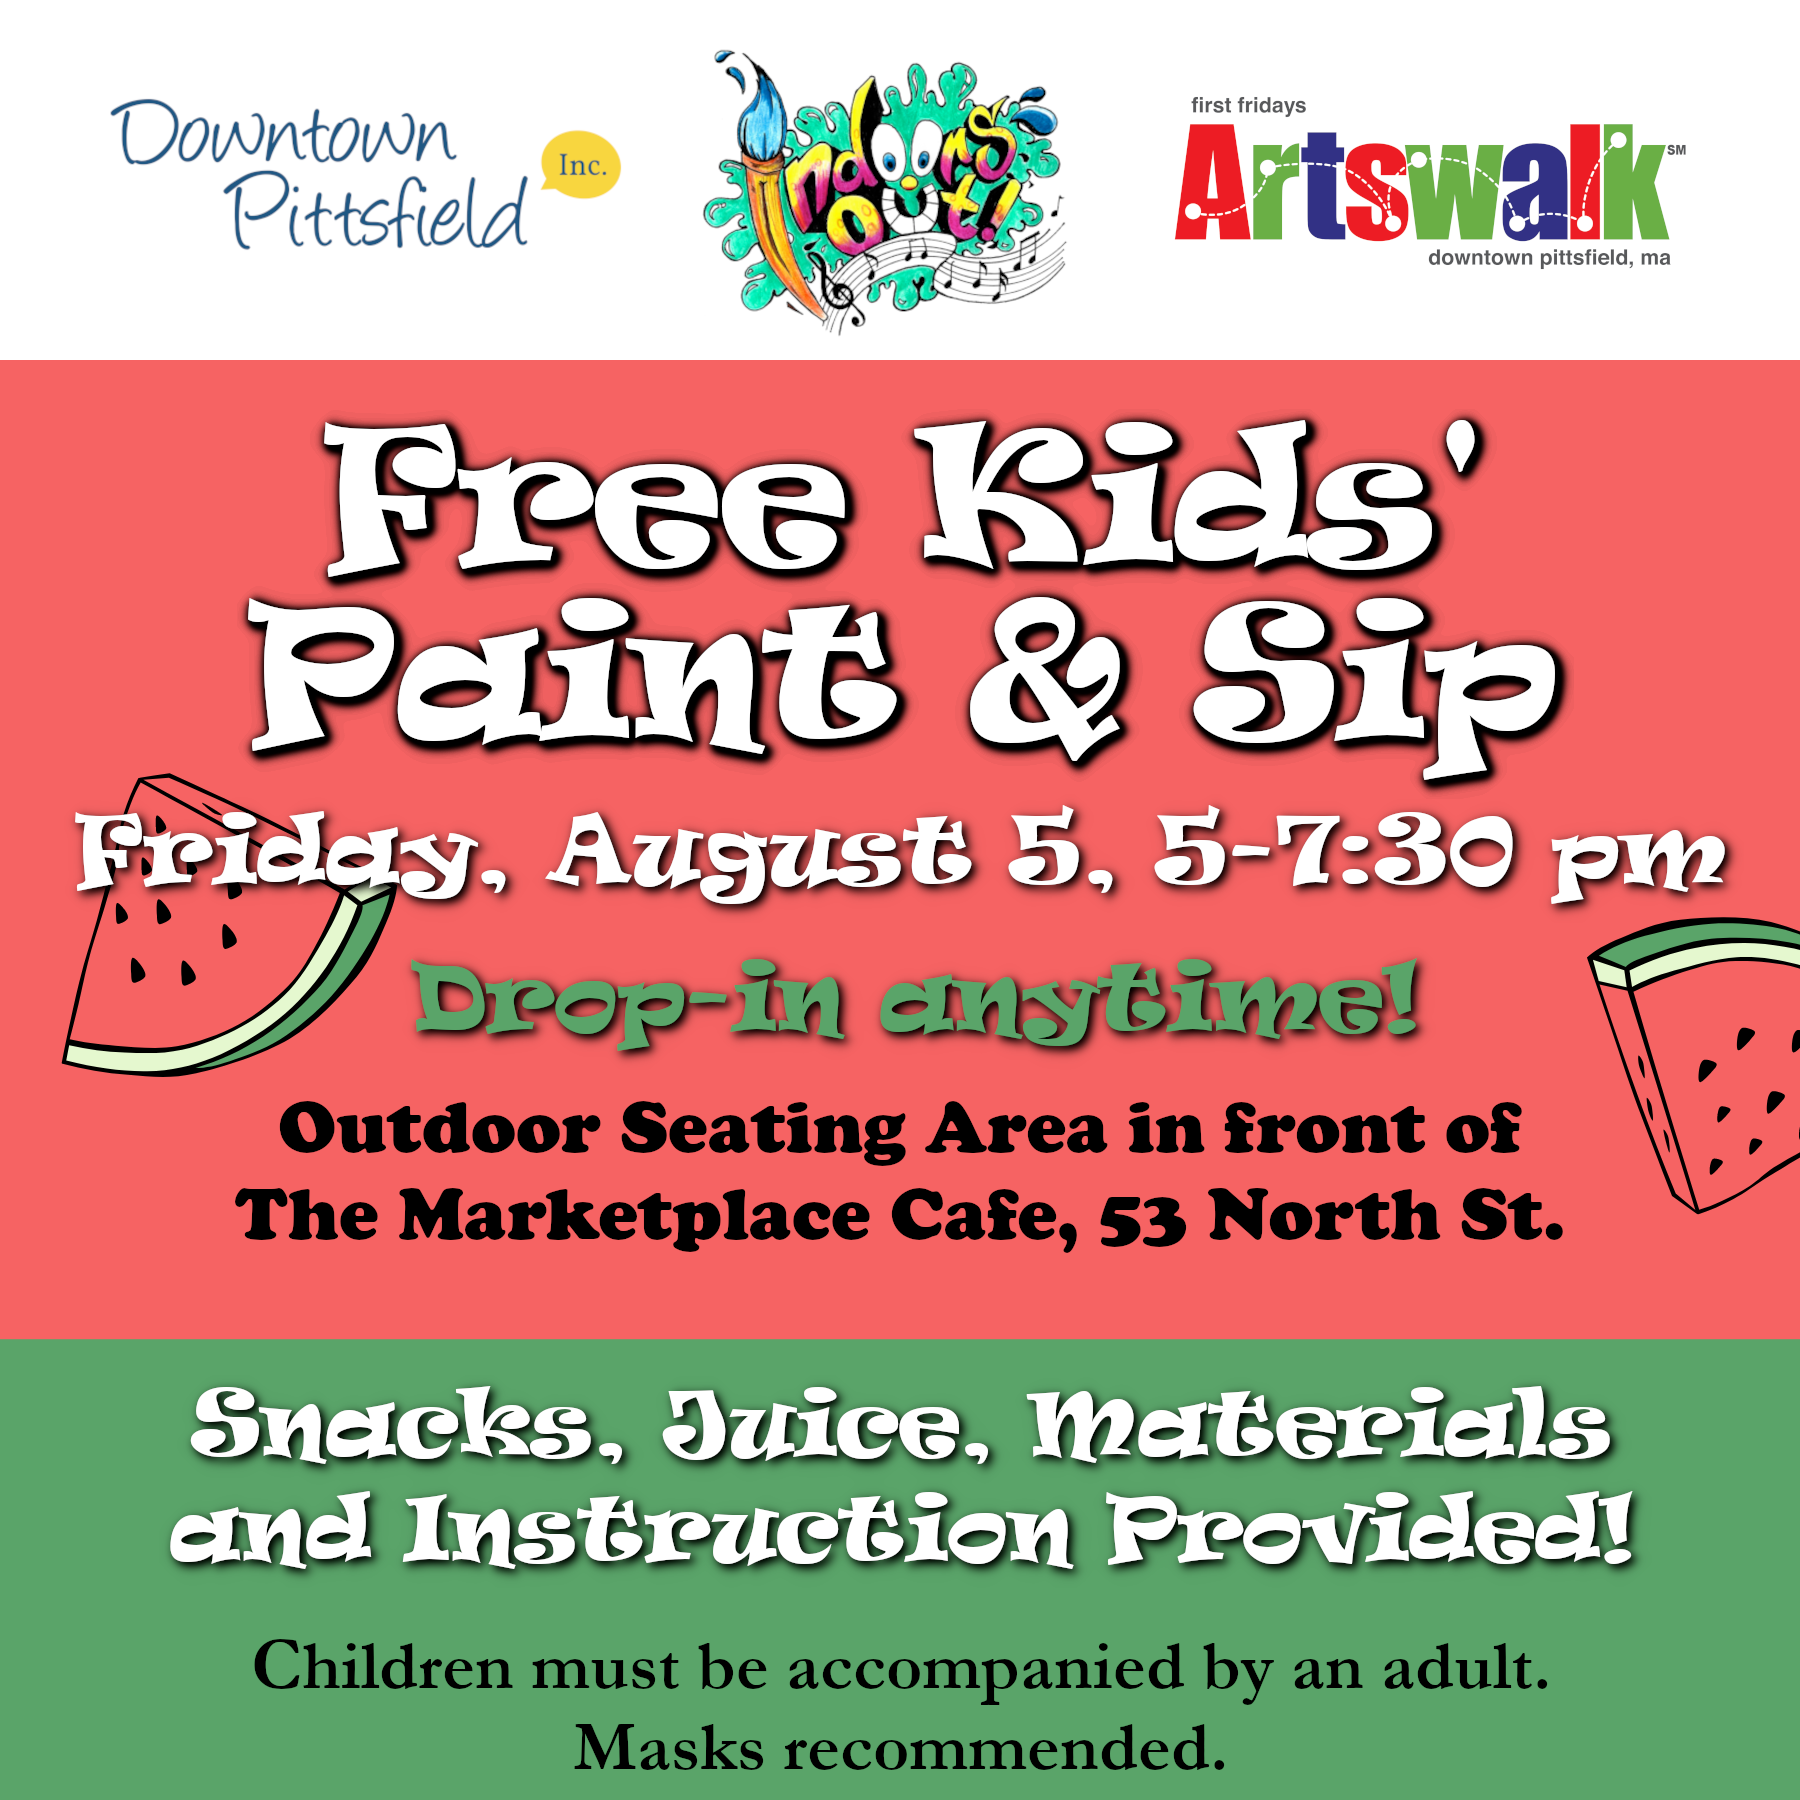 Indoors Out! Free Kids’ Paint & Sip, Friday, August 5, 5-7:30 pm.